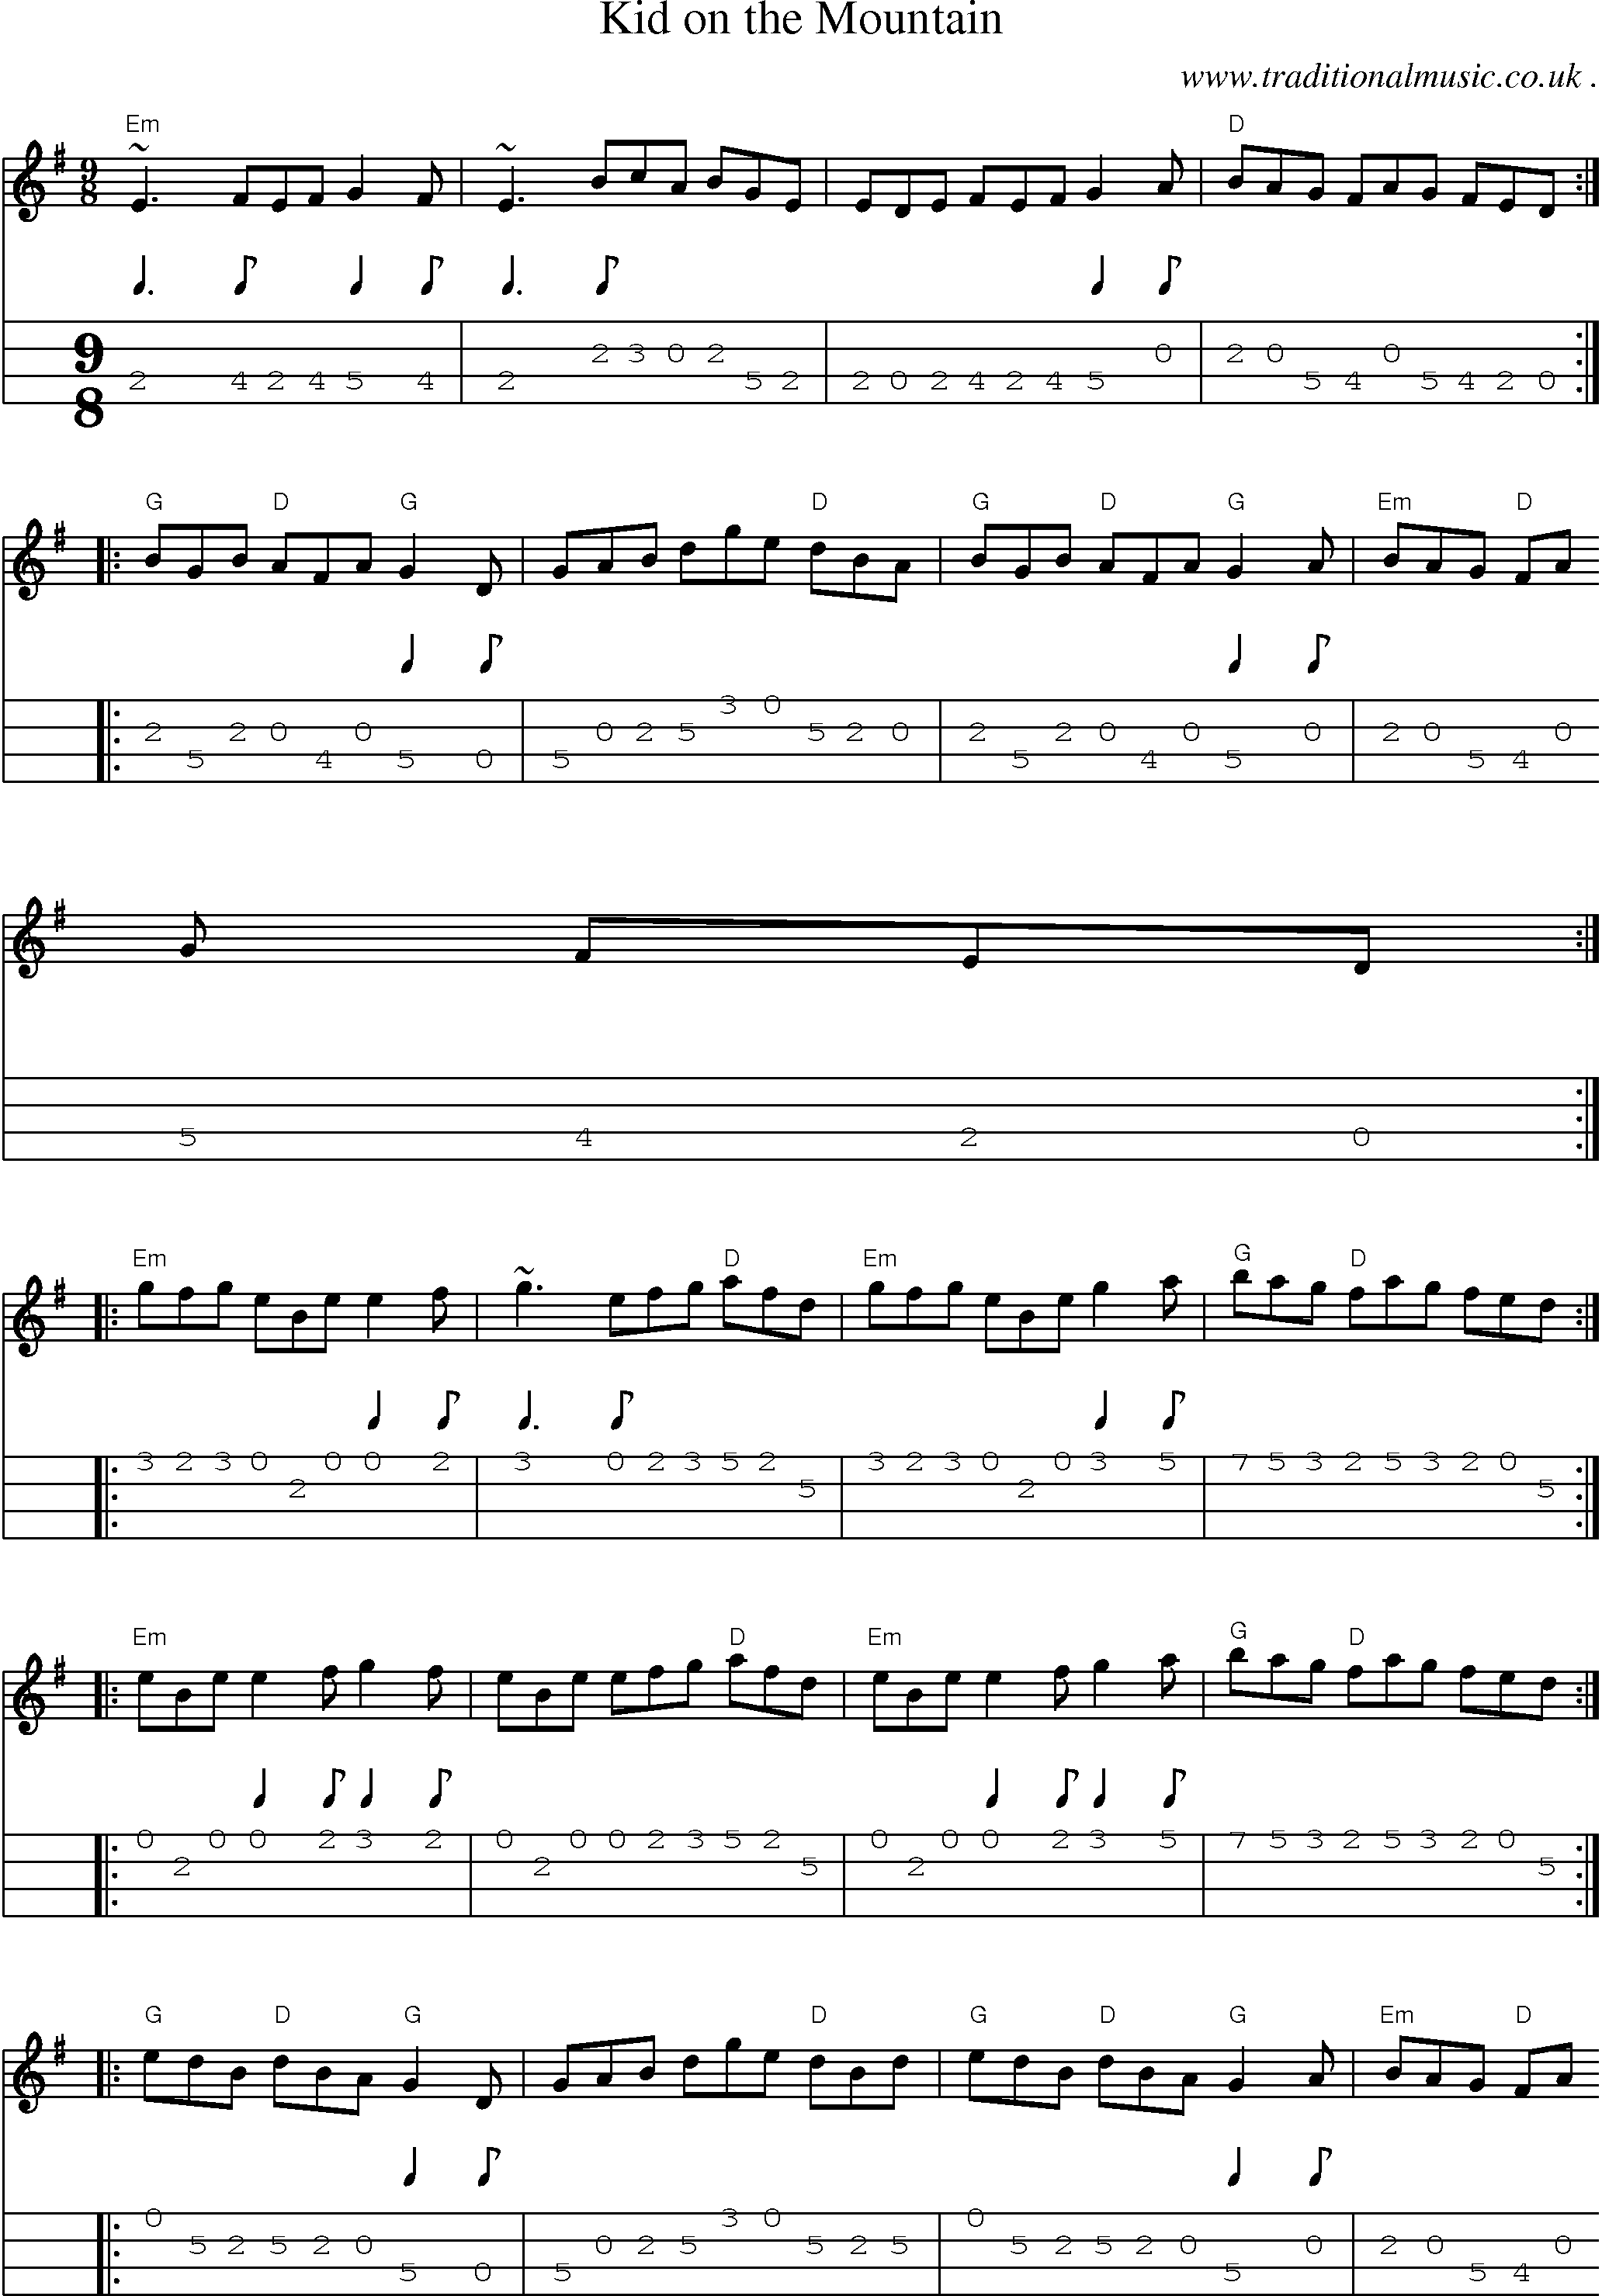 Music Score and Guitar Tabs for Kid On The Mountain